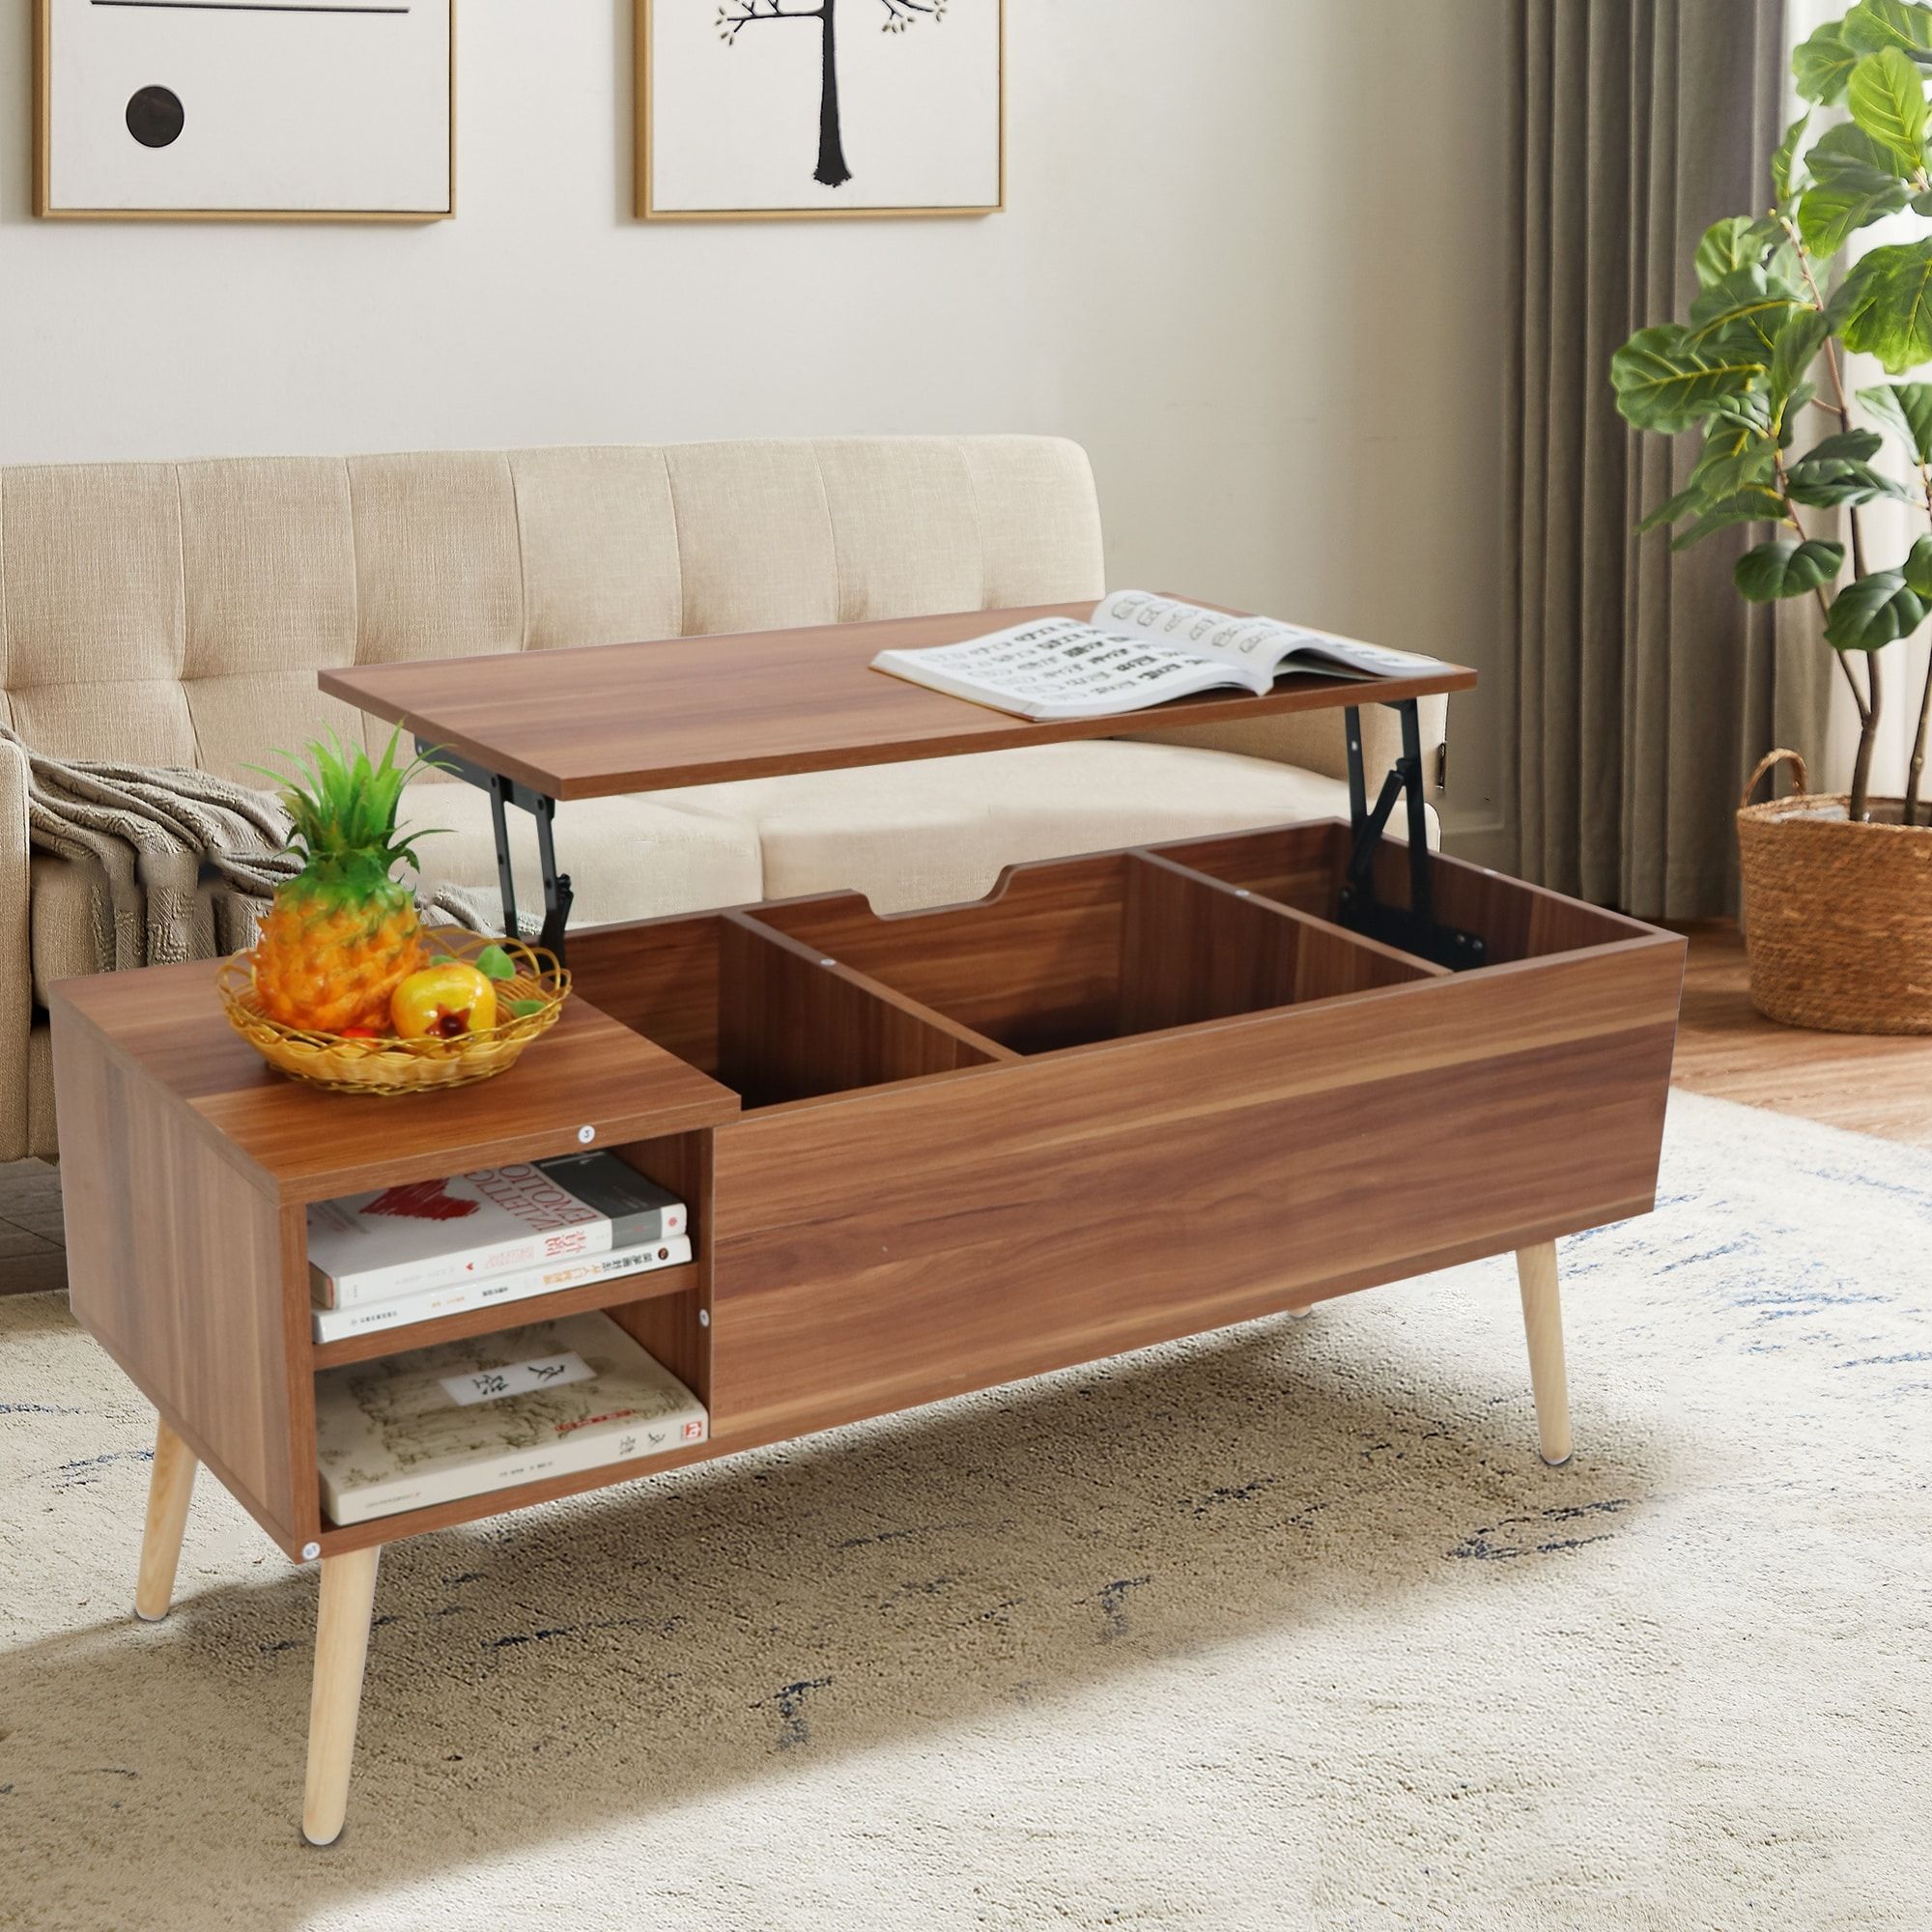 43" Lift Top Coffee Table With Hidden Storage Compartment And Open Shelves  – Bed Bath & Beyond – 36092425 Regarding Modern Coffee Tables With Hidden Storage Compartments (Photo 15 of 15)